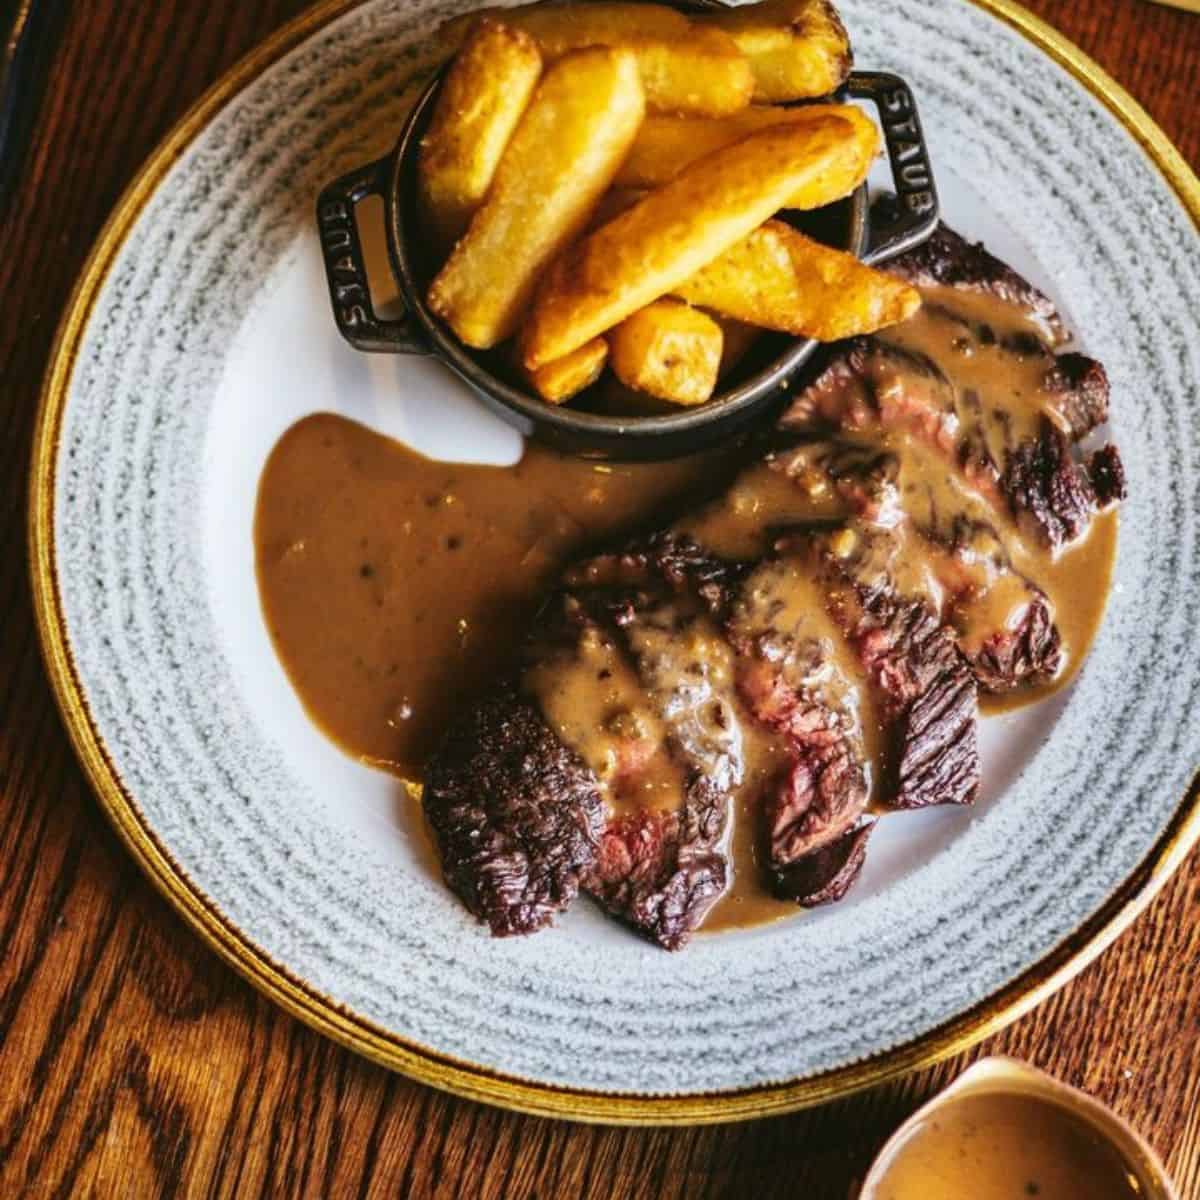 Steak served with a seasonal sauce and chips on the side The Coal Shed